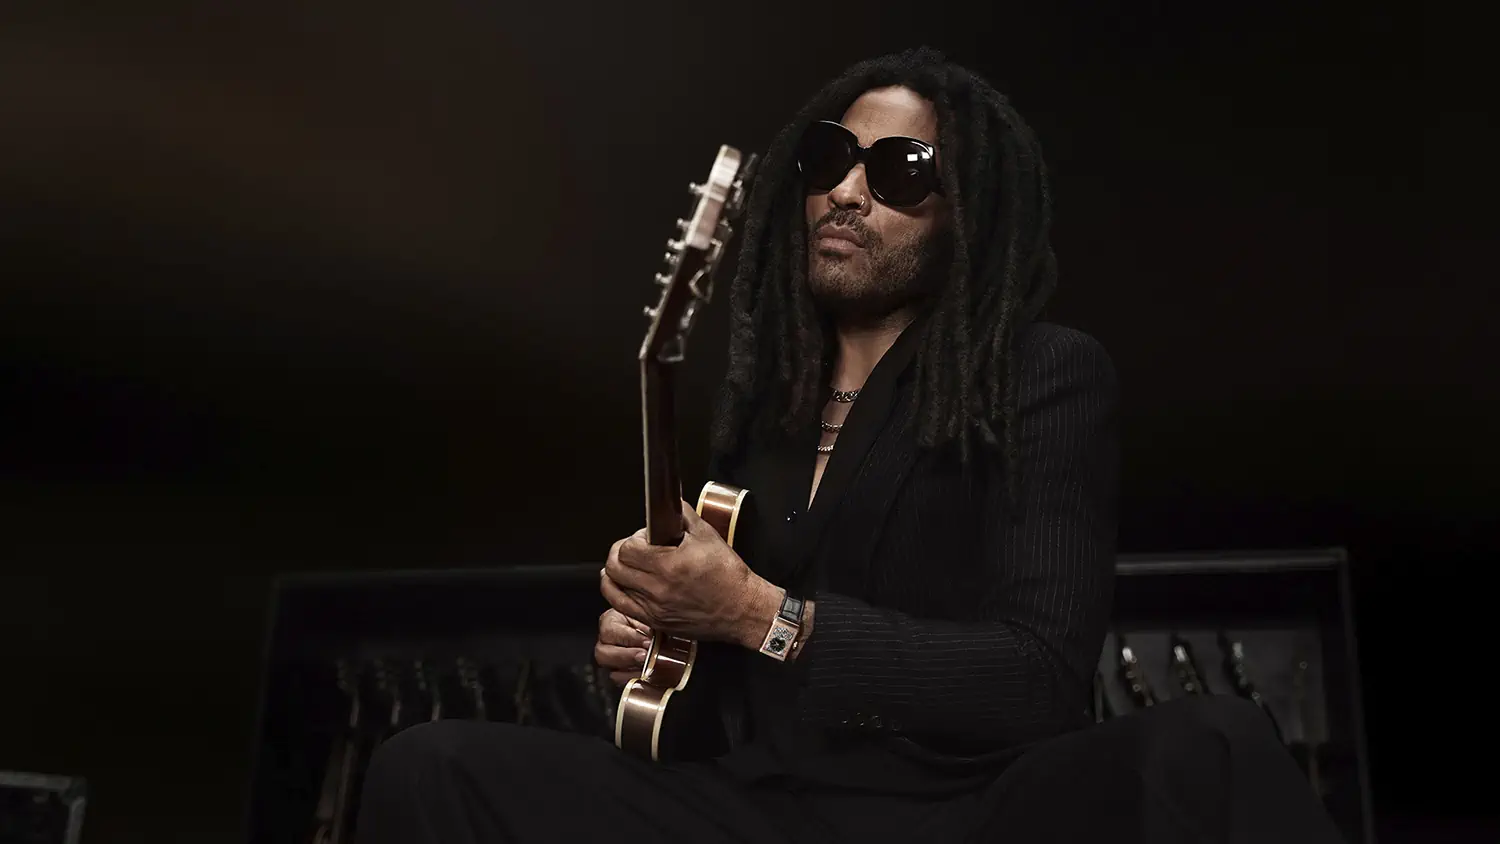 Jaeger-LeCoultre welcomes Lenny Kravitz as its newest ambassador